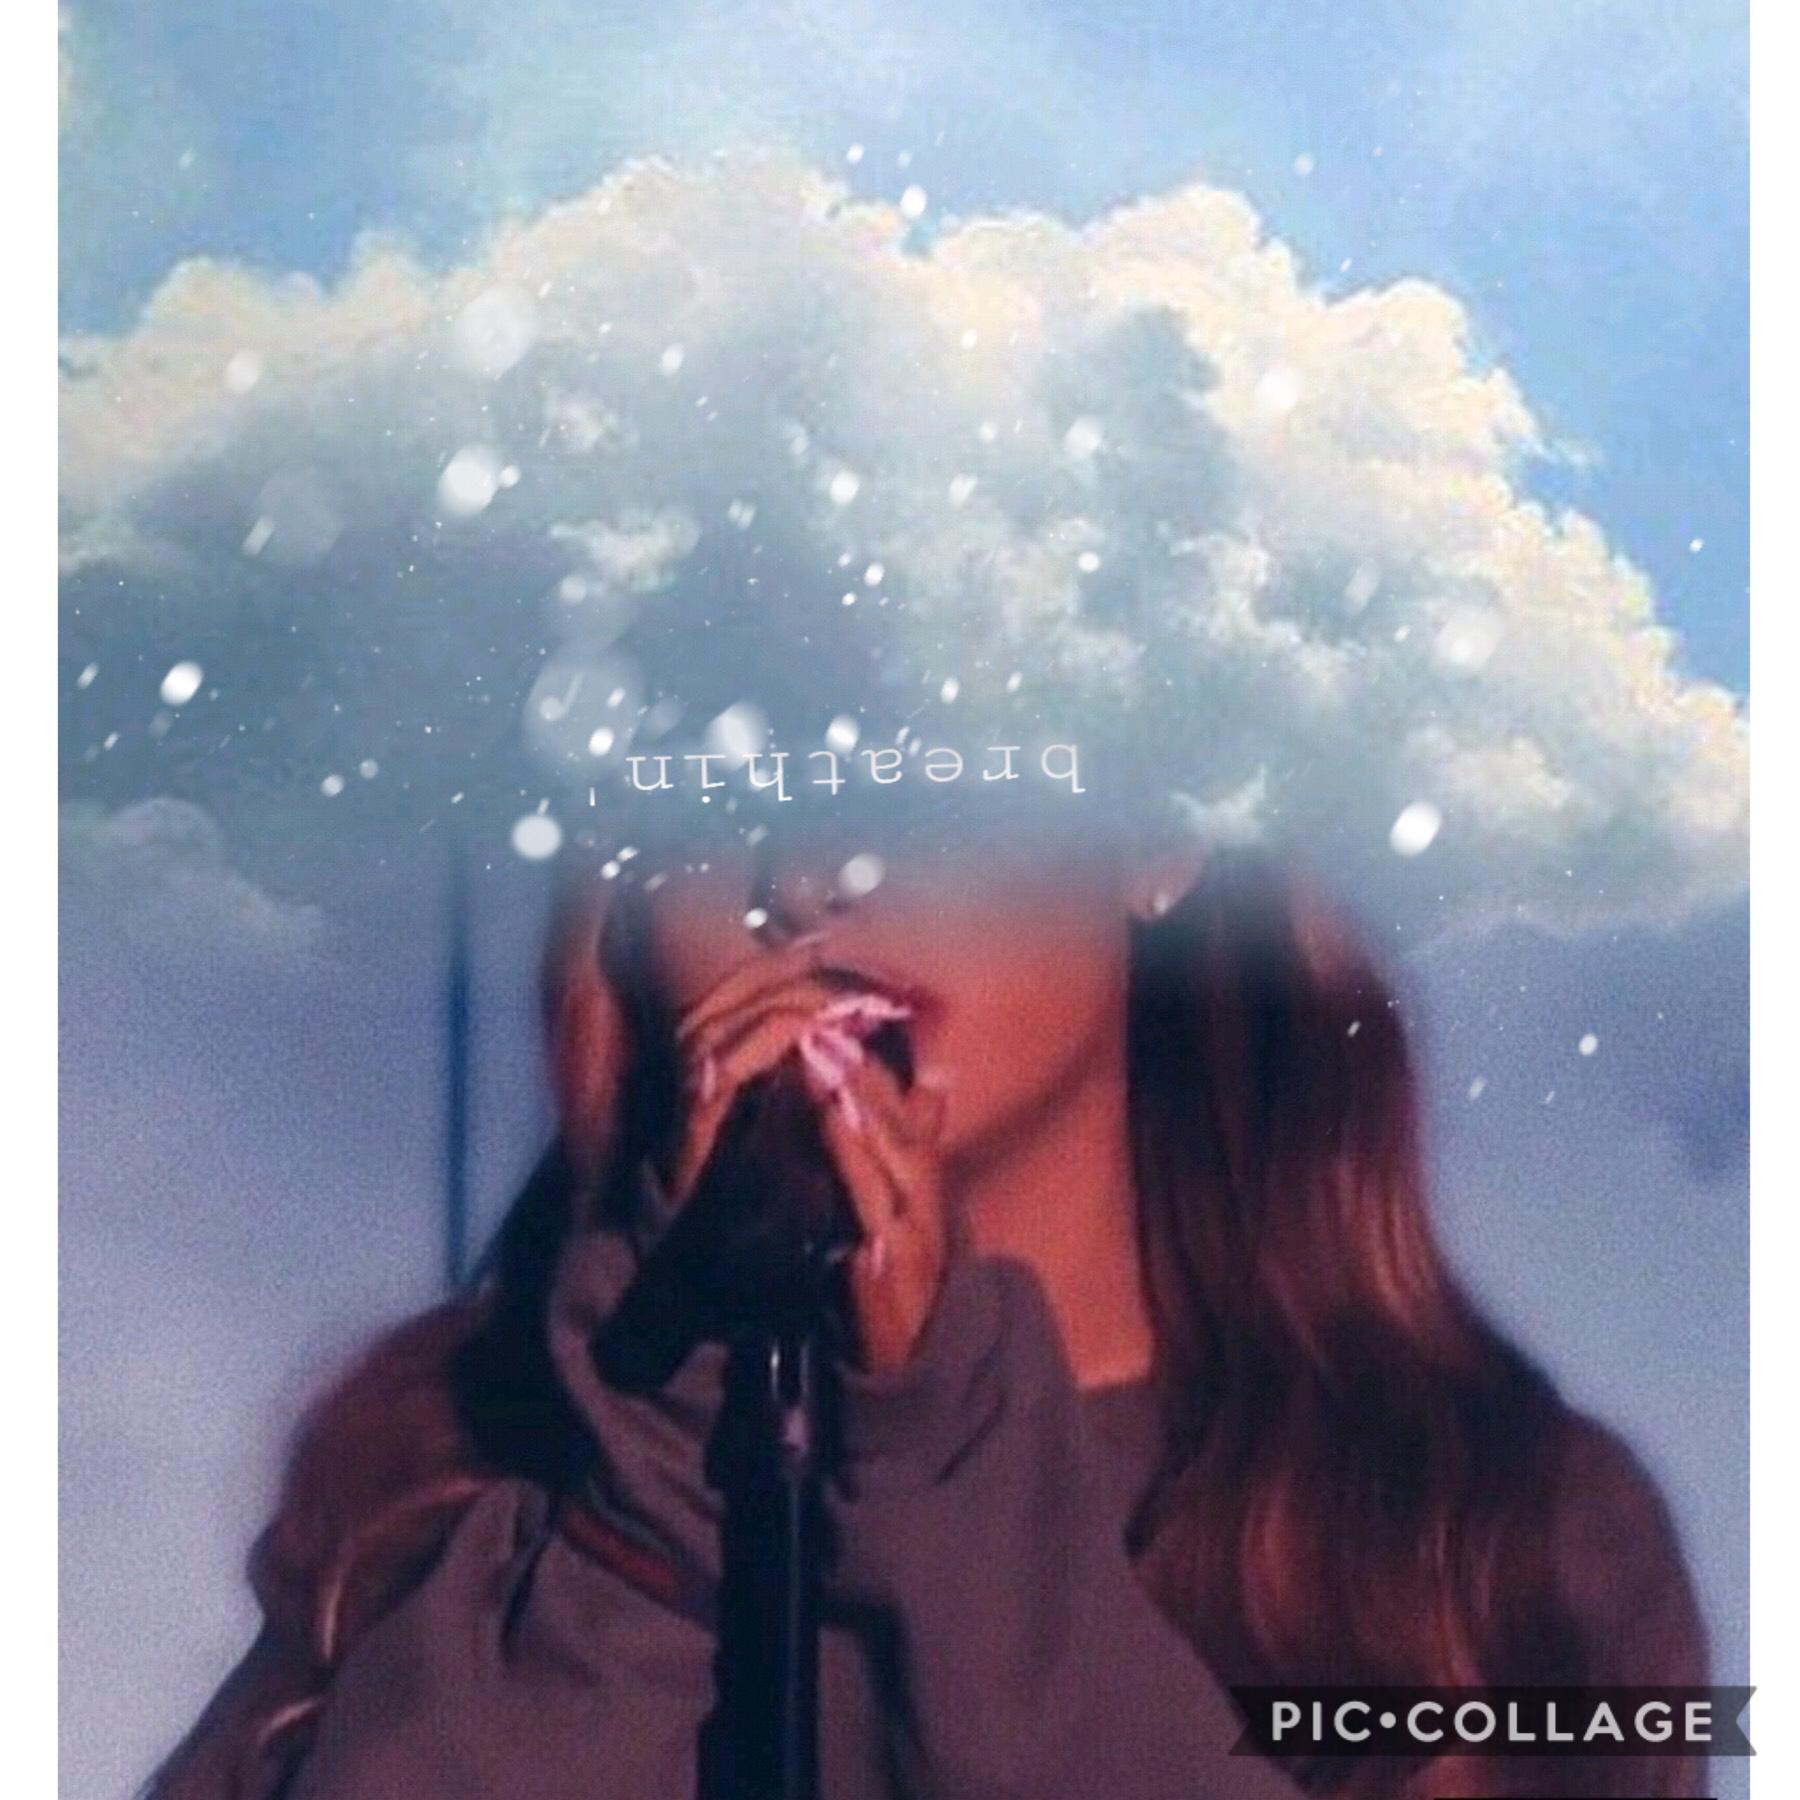 whoa look at me getting back into the edit game. i forgot how fun this is :) background/collage: SplitPic. text, filters, paint: PicsArt
ariana grande’s new album is straight fire 